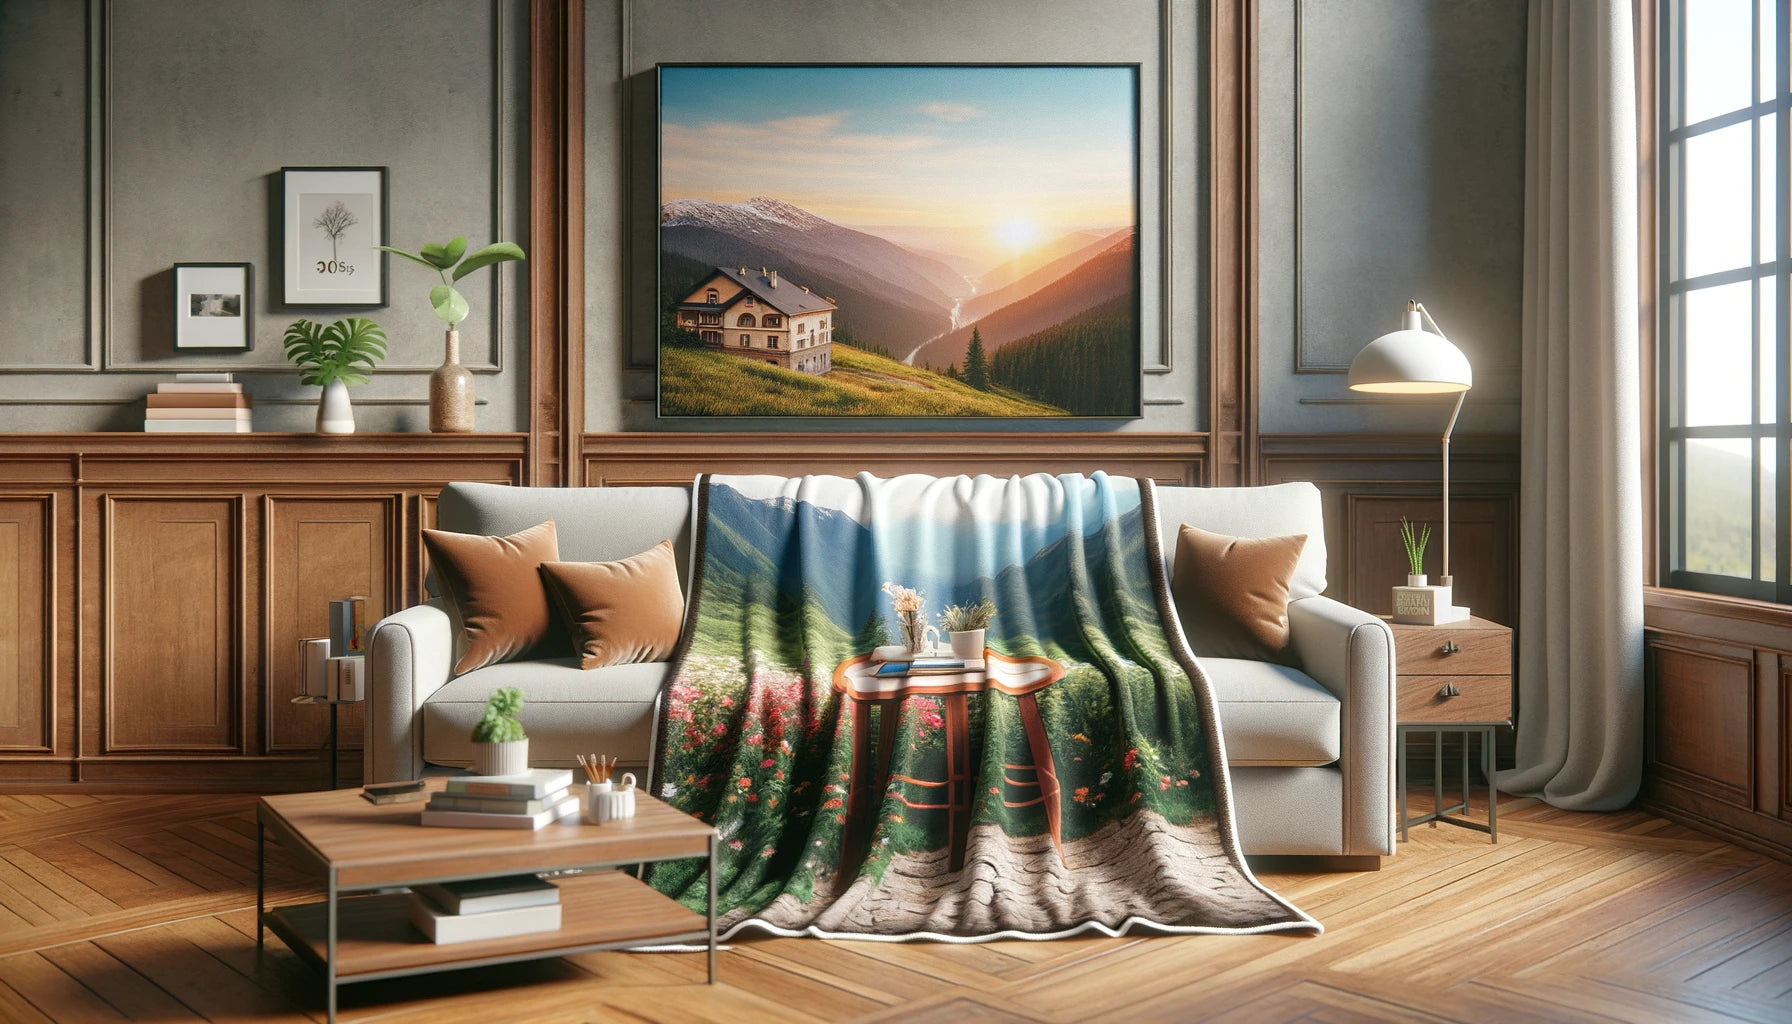 How to Put a Picture on a Blanket: A DIY Guide